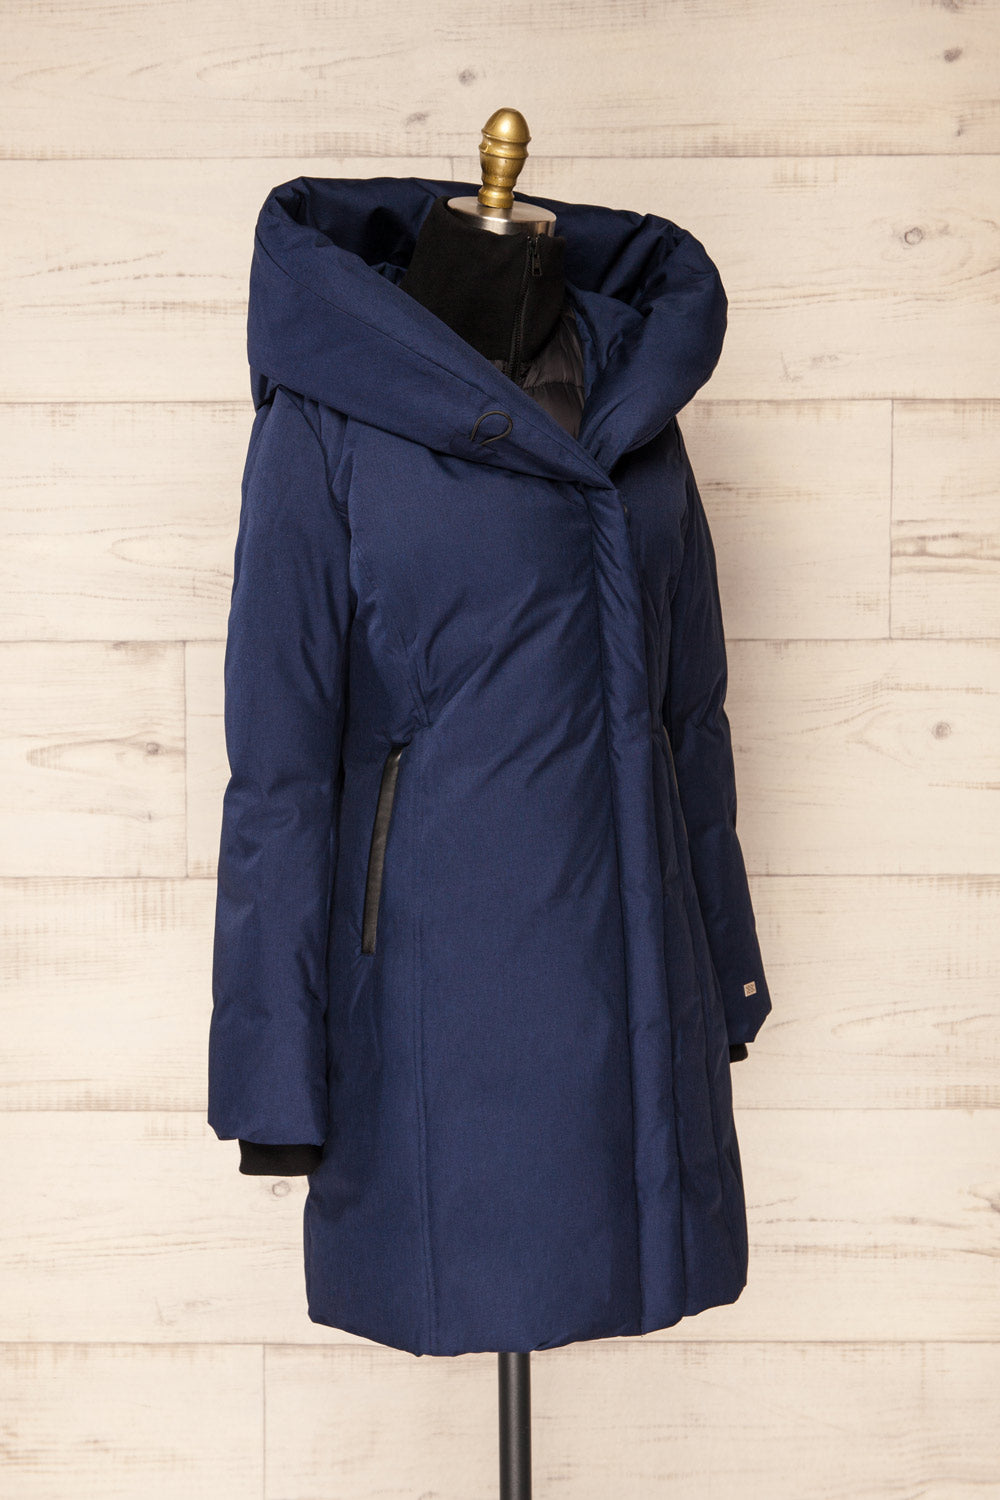 Camelia Navy Quilted Soia&Kyo Parka with Hood | La Petite Garçonne side view